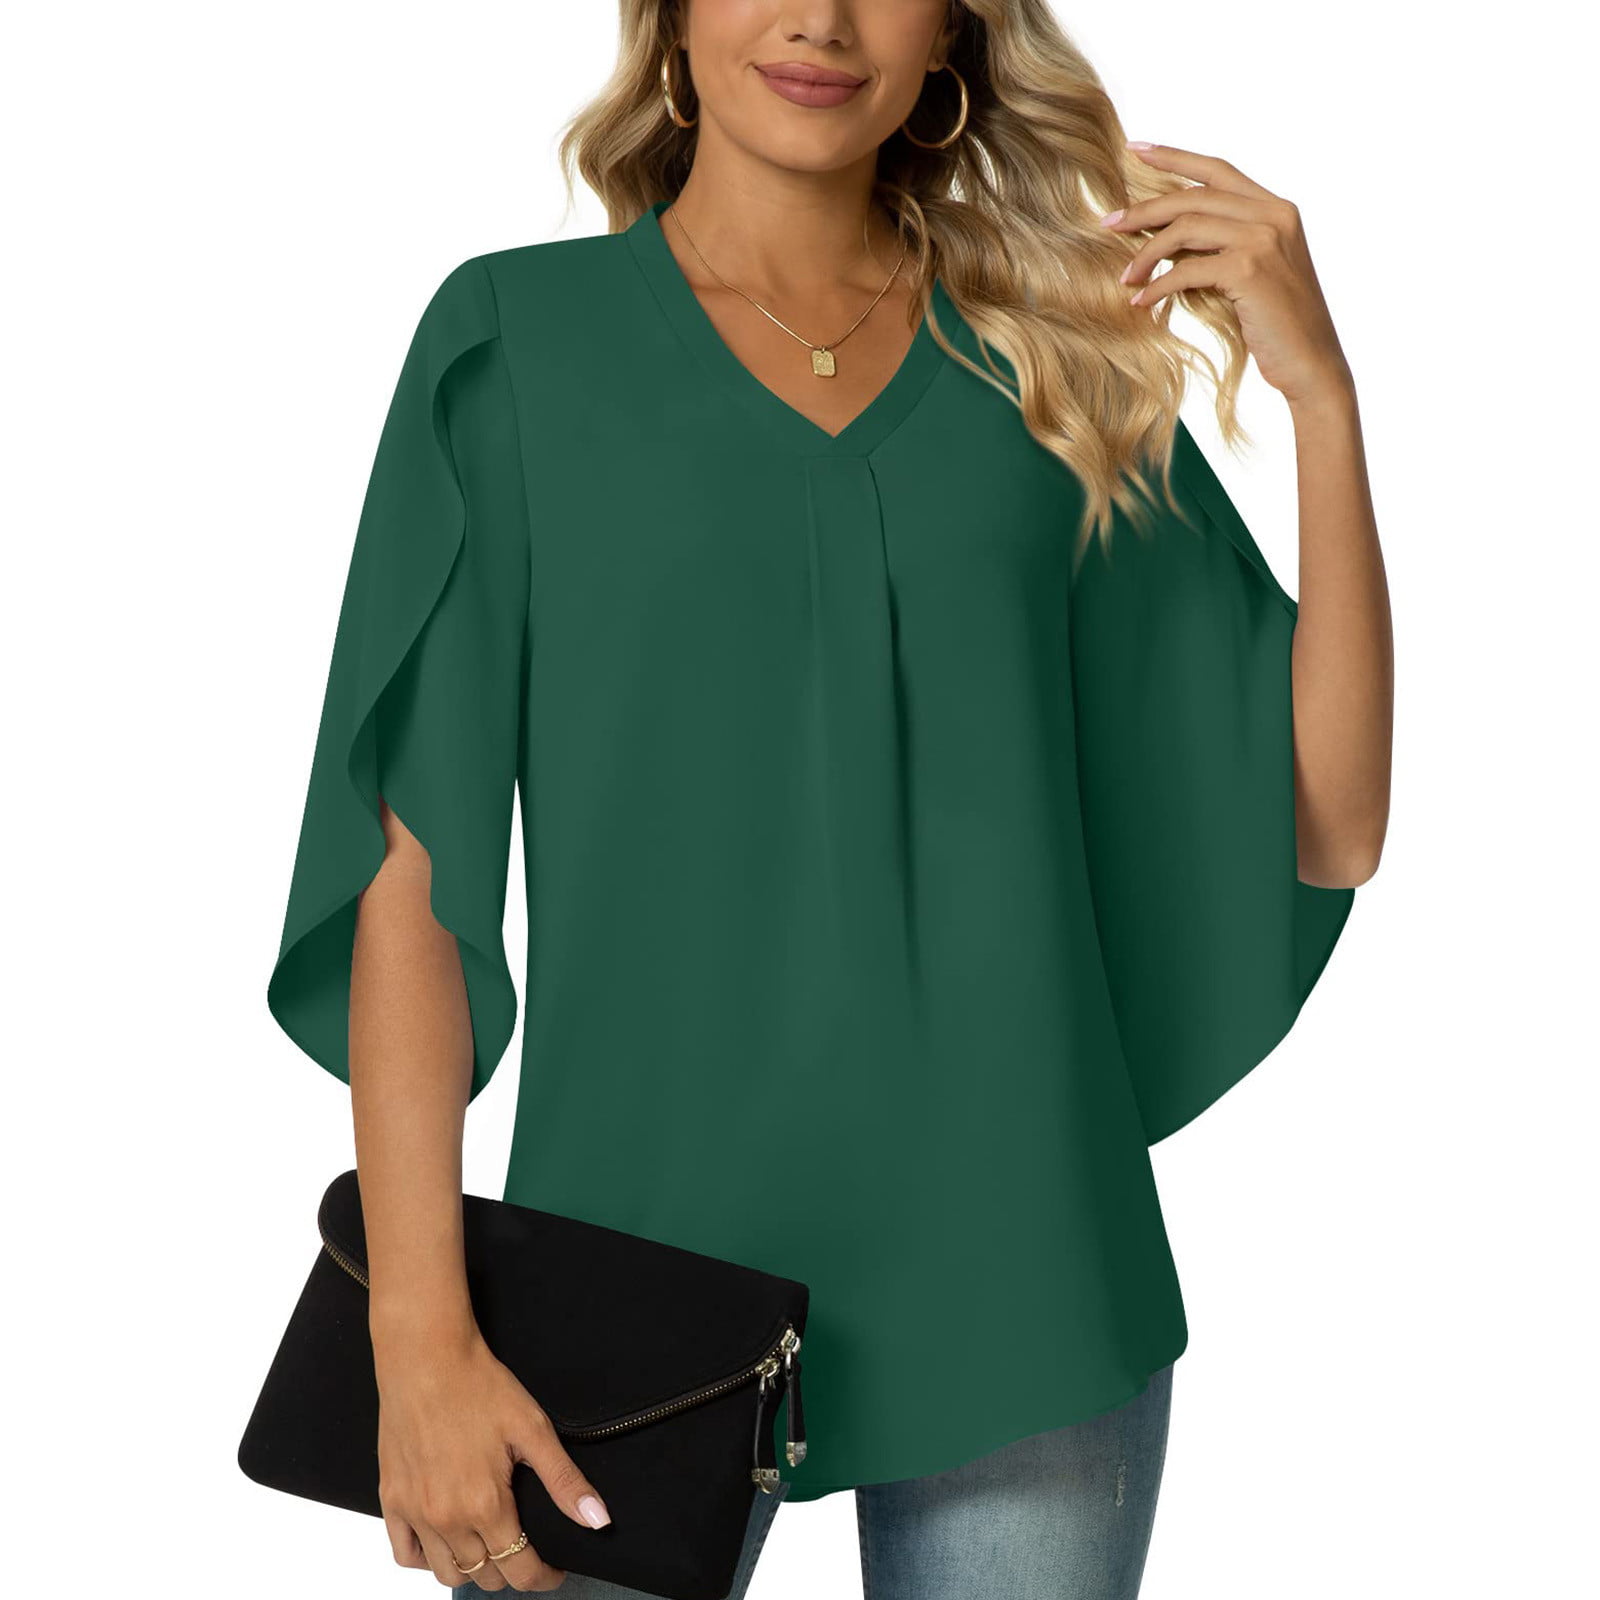 Buy Light Green Solid 3-4 Sleeves Women Top Rayon for Best Price, Reviews,  Free Shipping